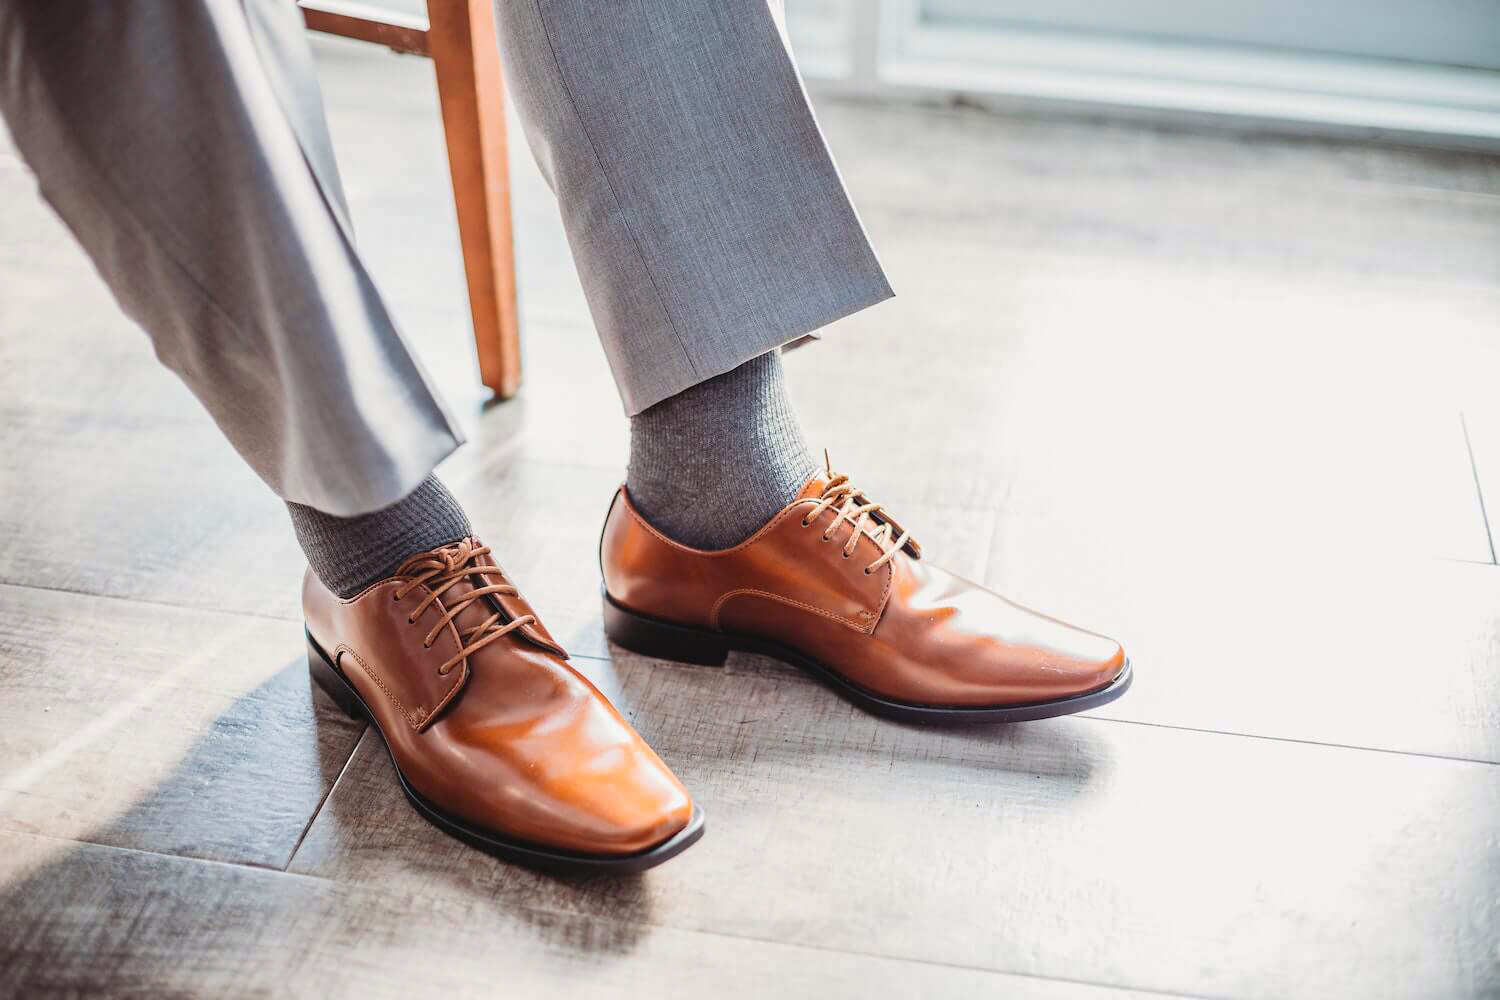 What color shoes to wear with a grey pants